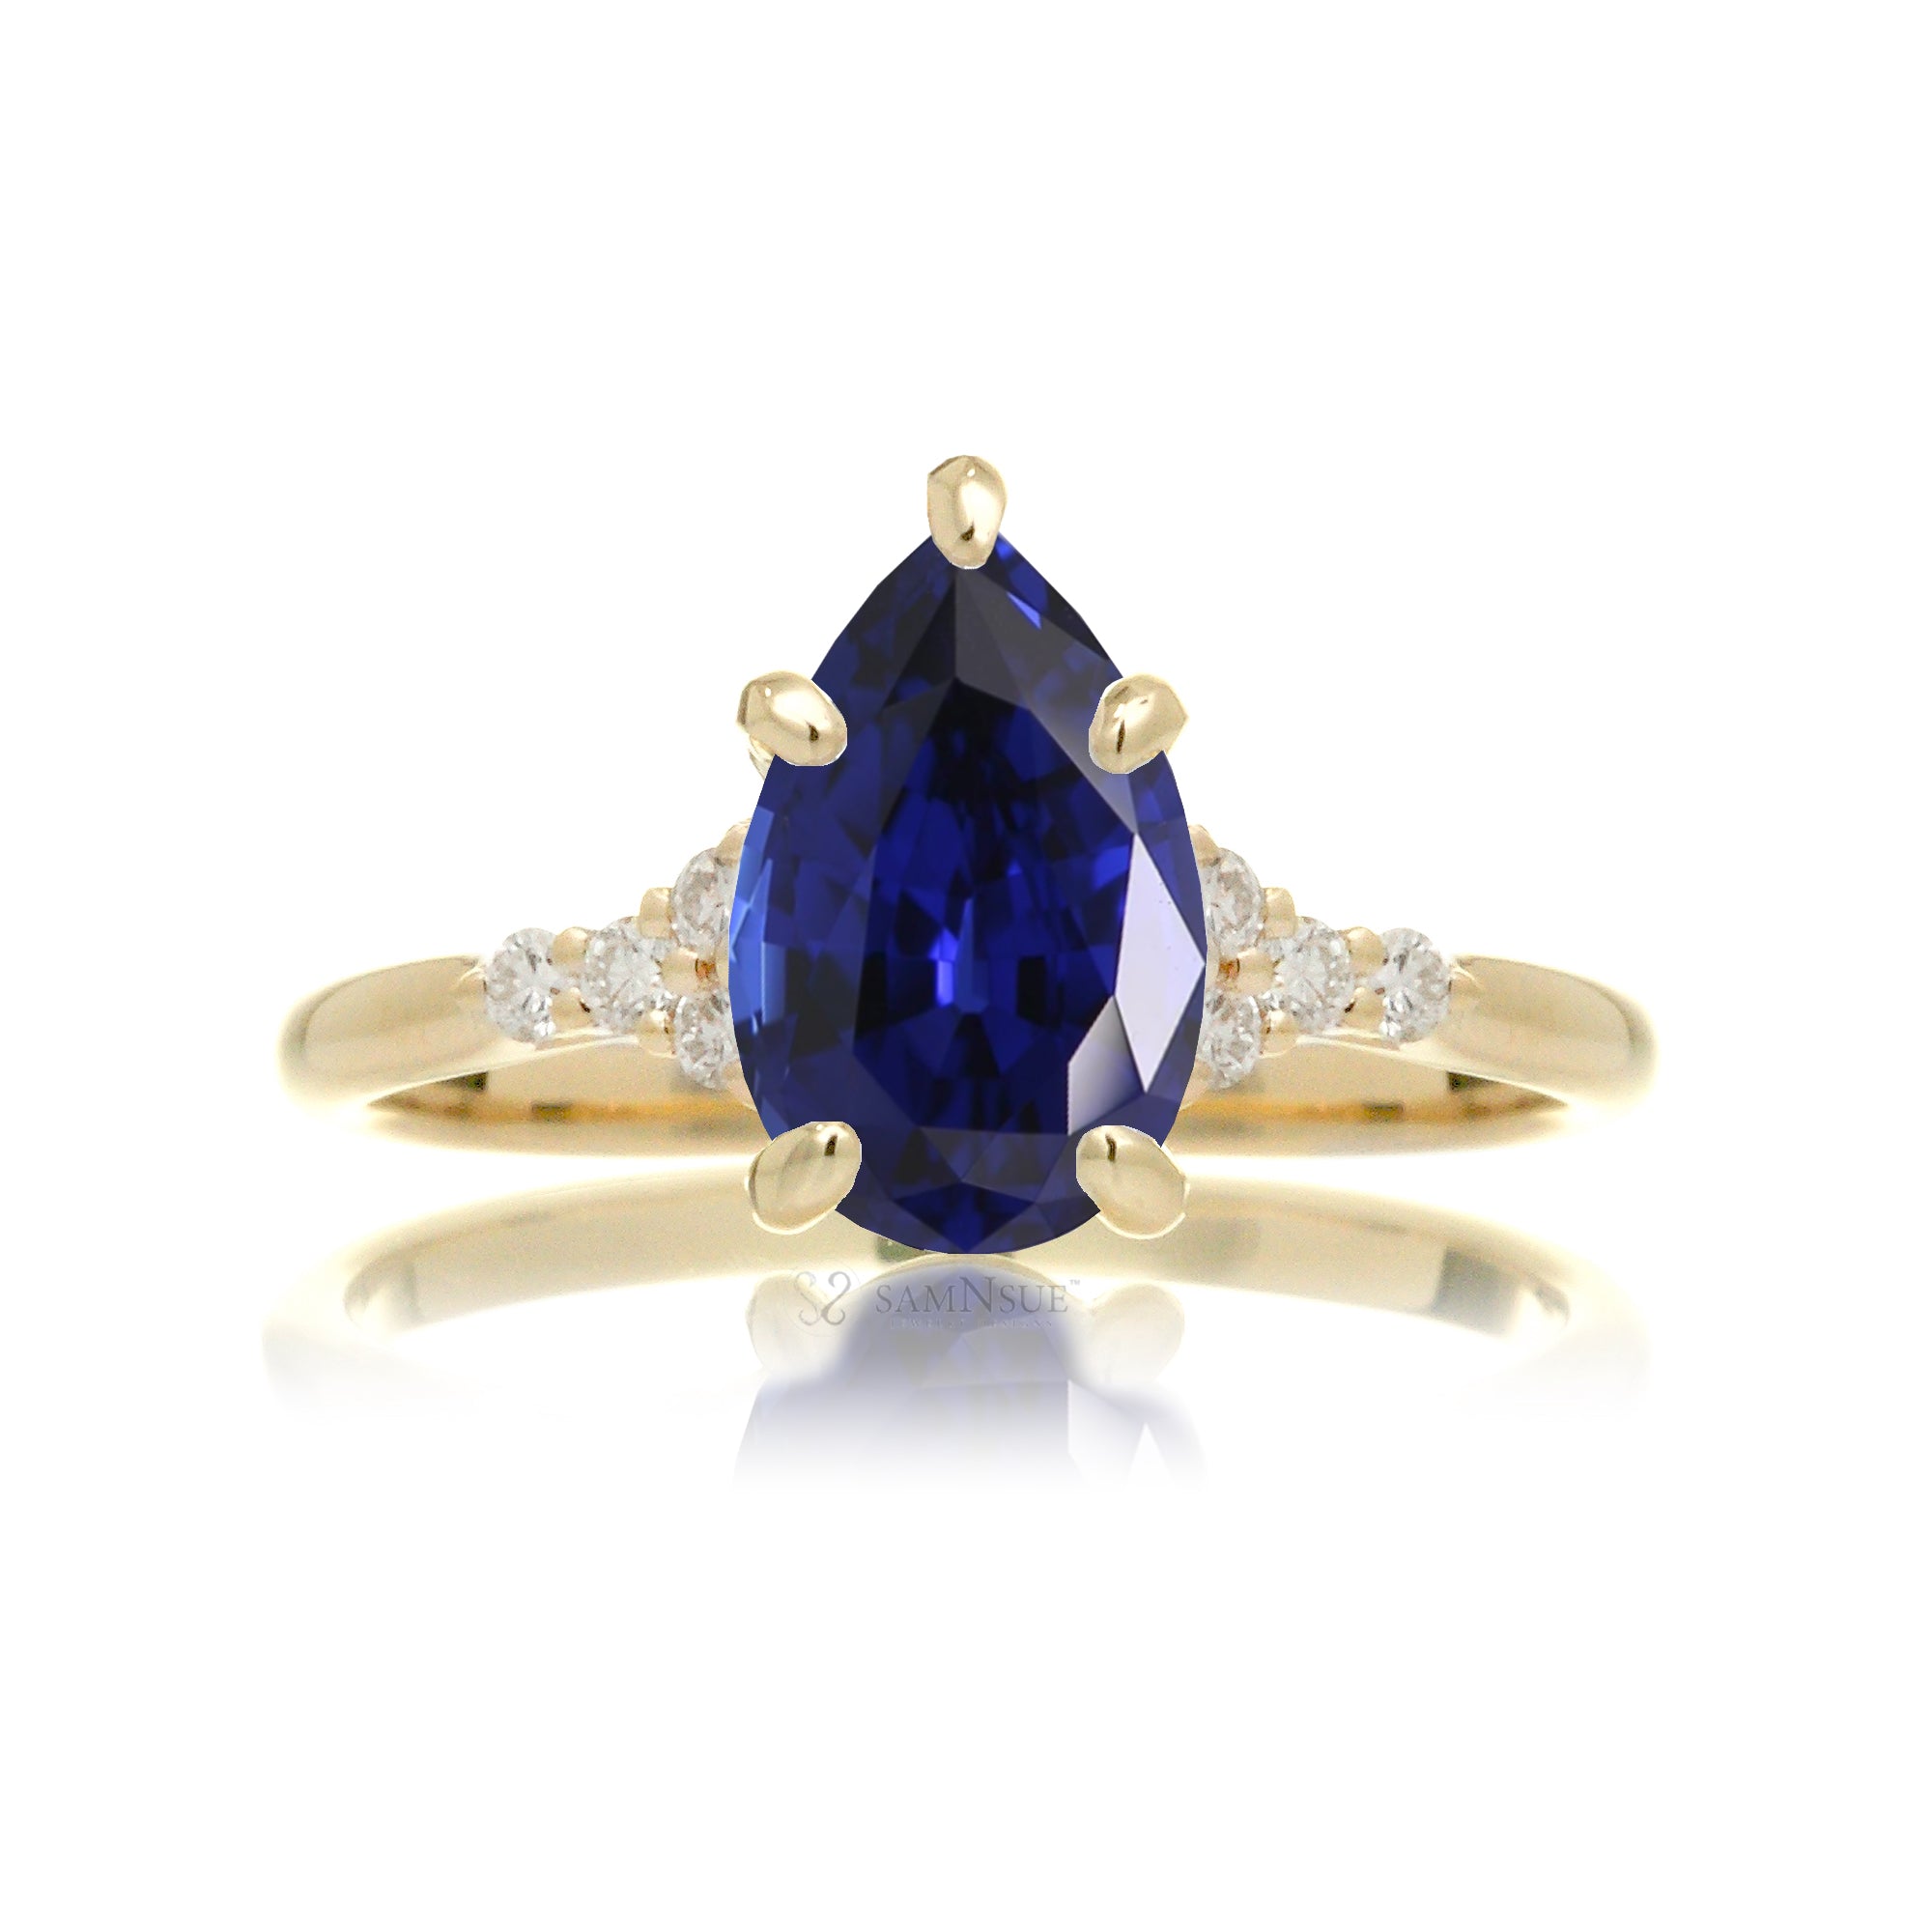 Pear shape blue sapphire diamond ring in yellow gold - the Chloe lab-grown